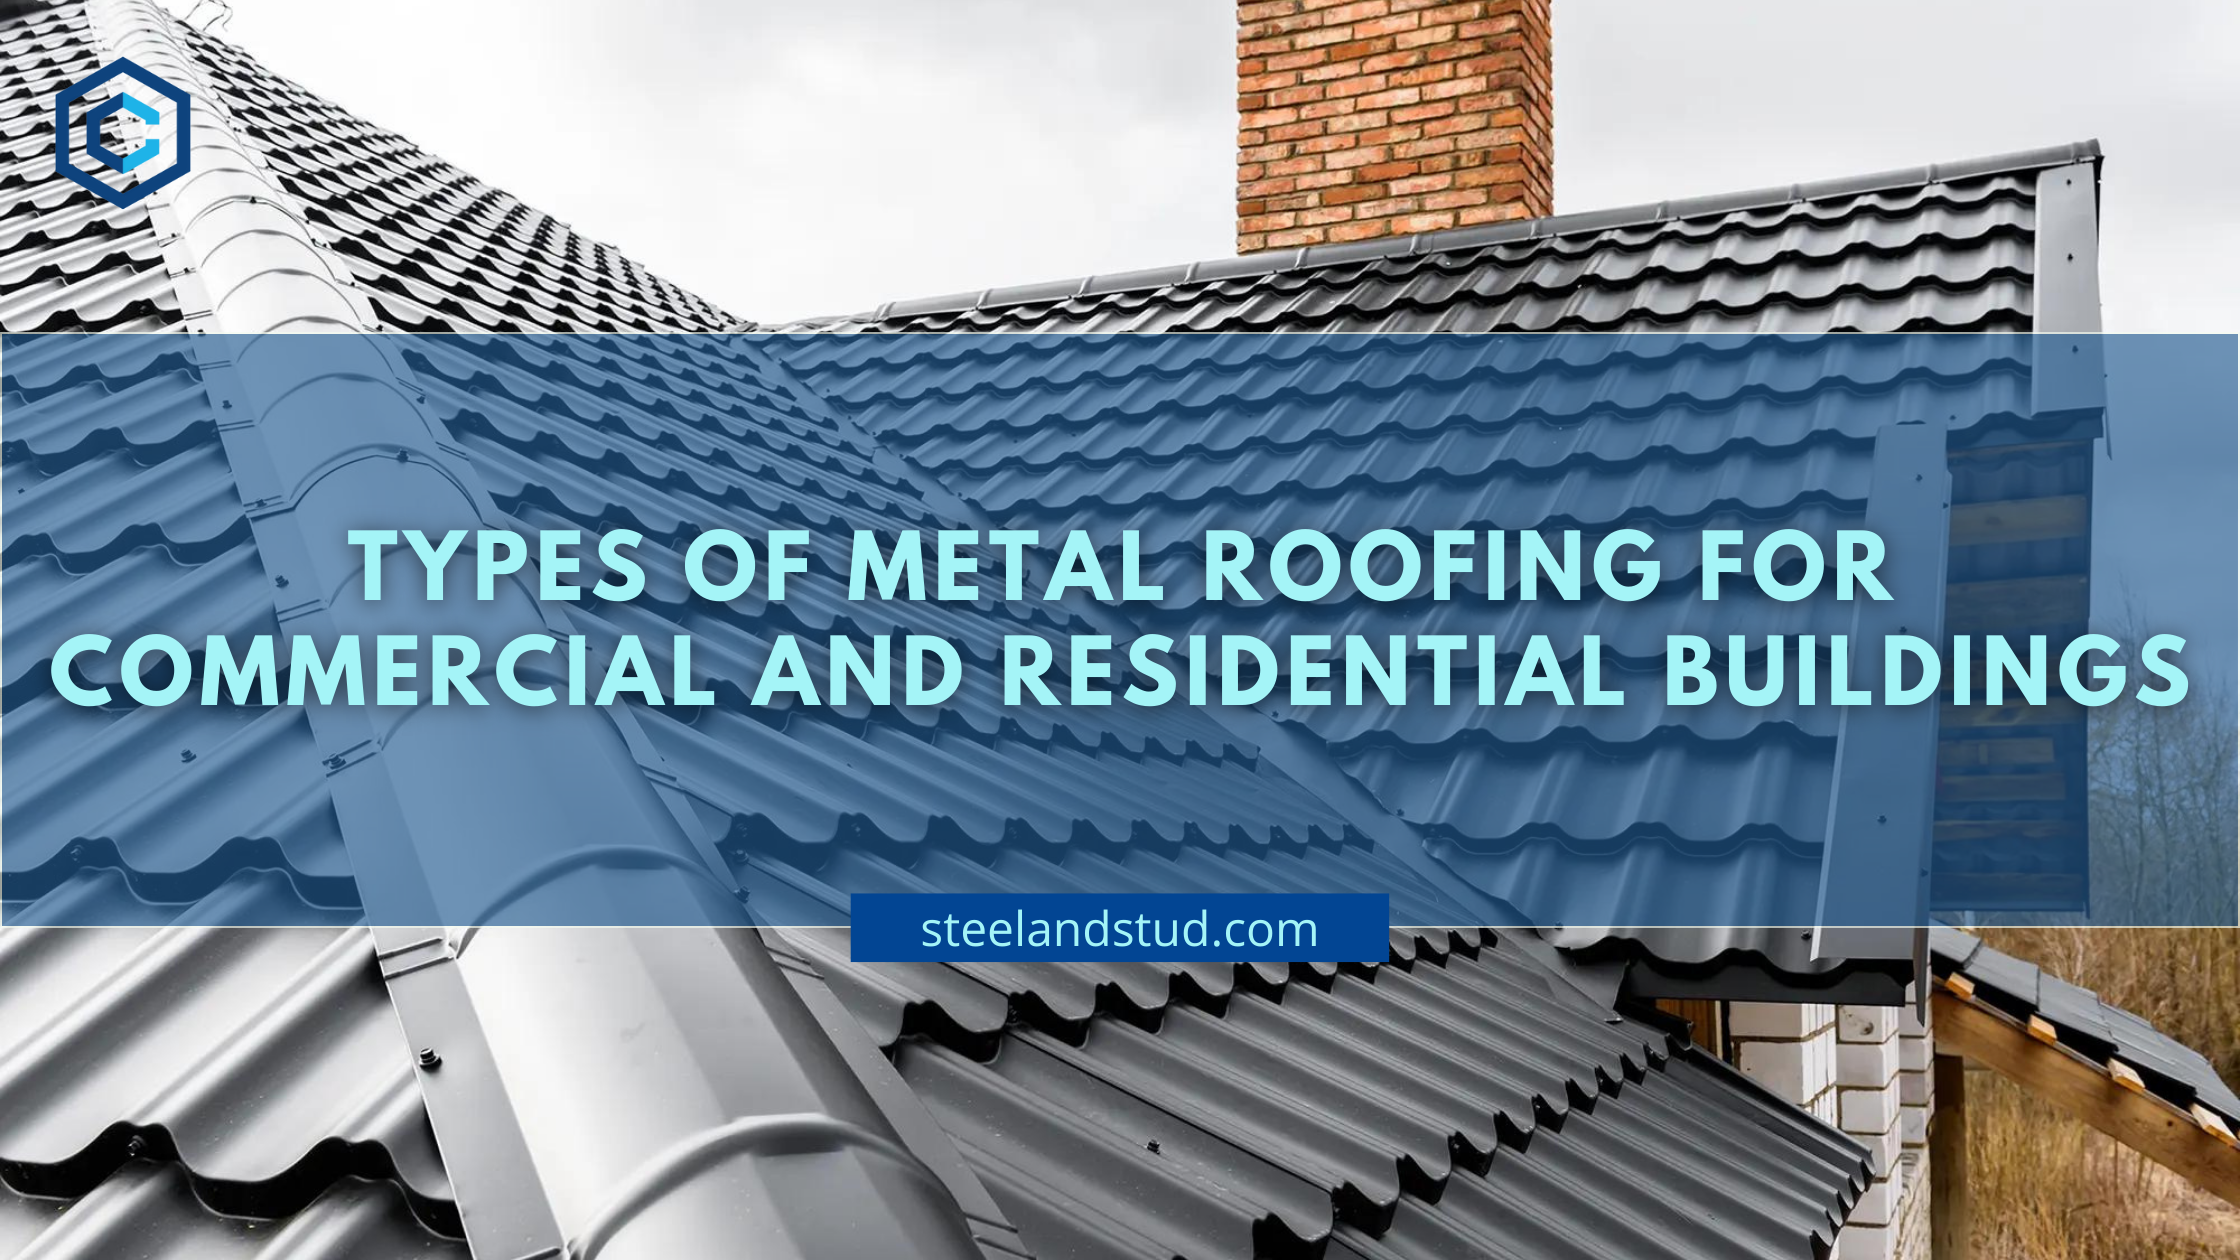 Types of Metal Roofing for Commercial and Residential Buildings